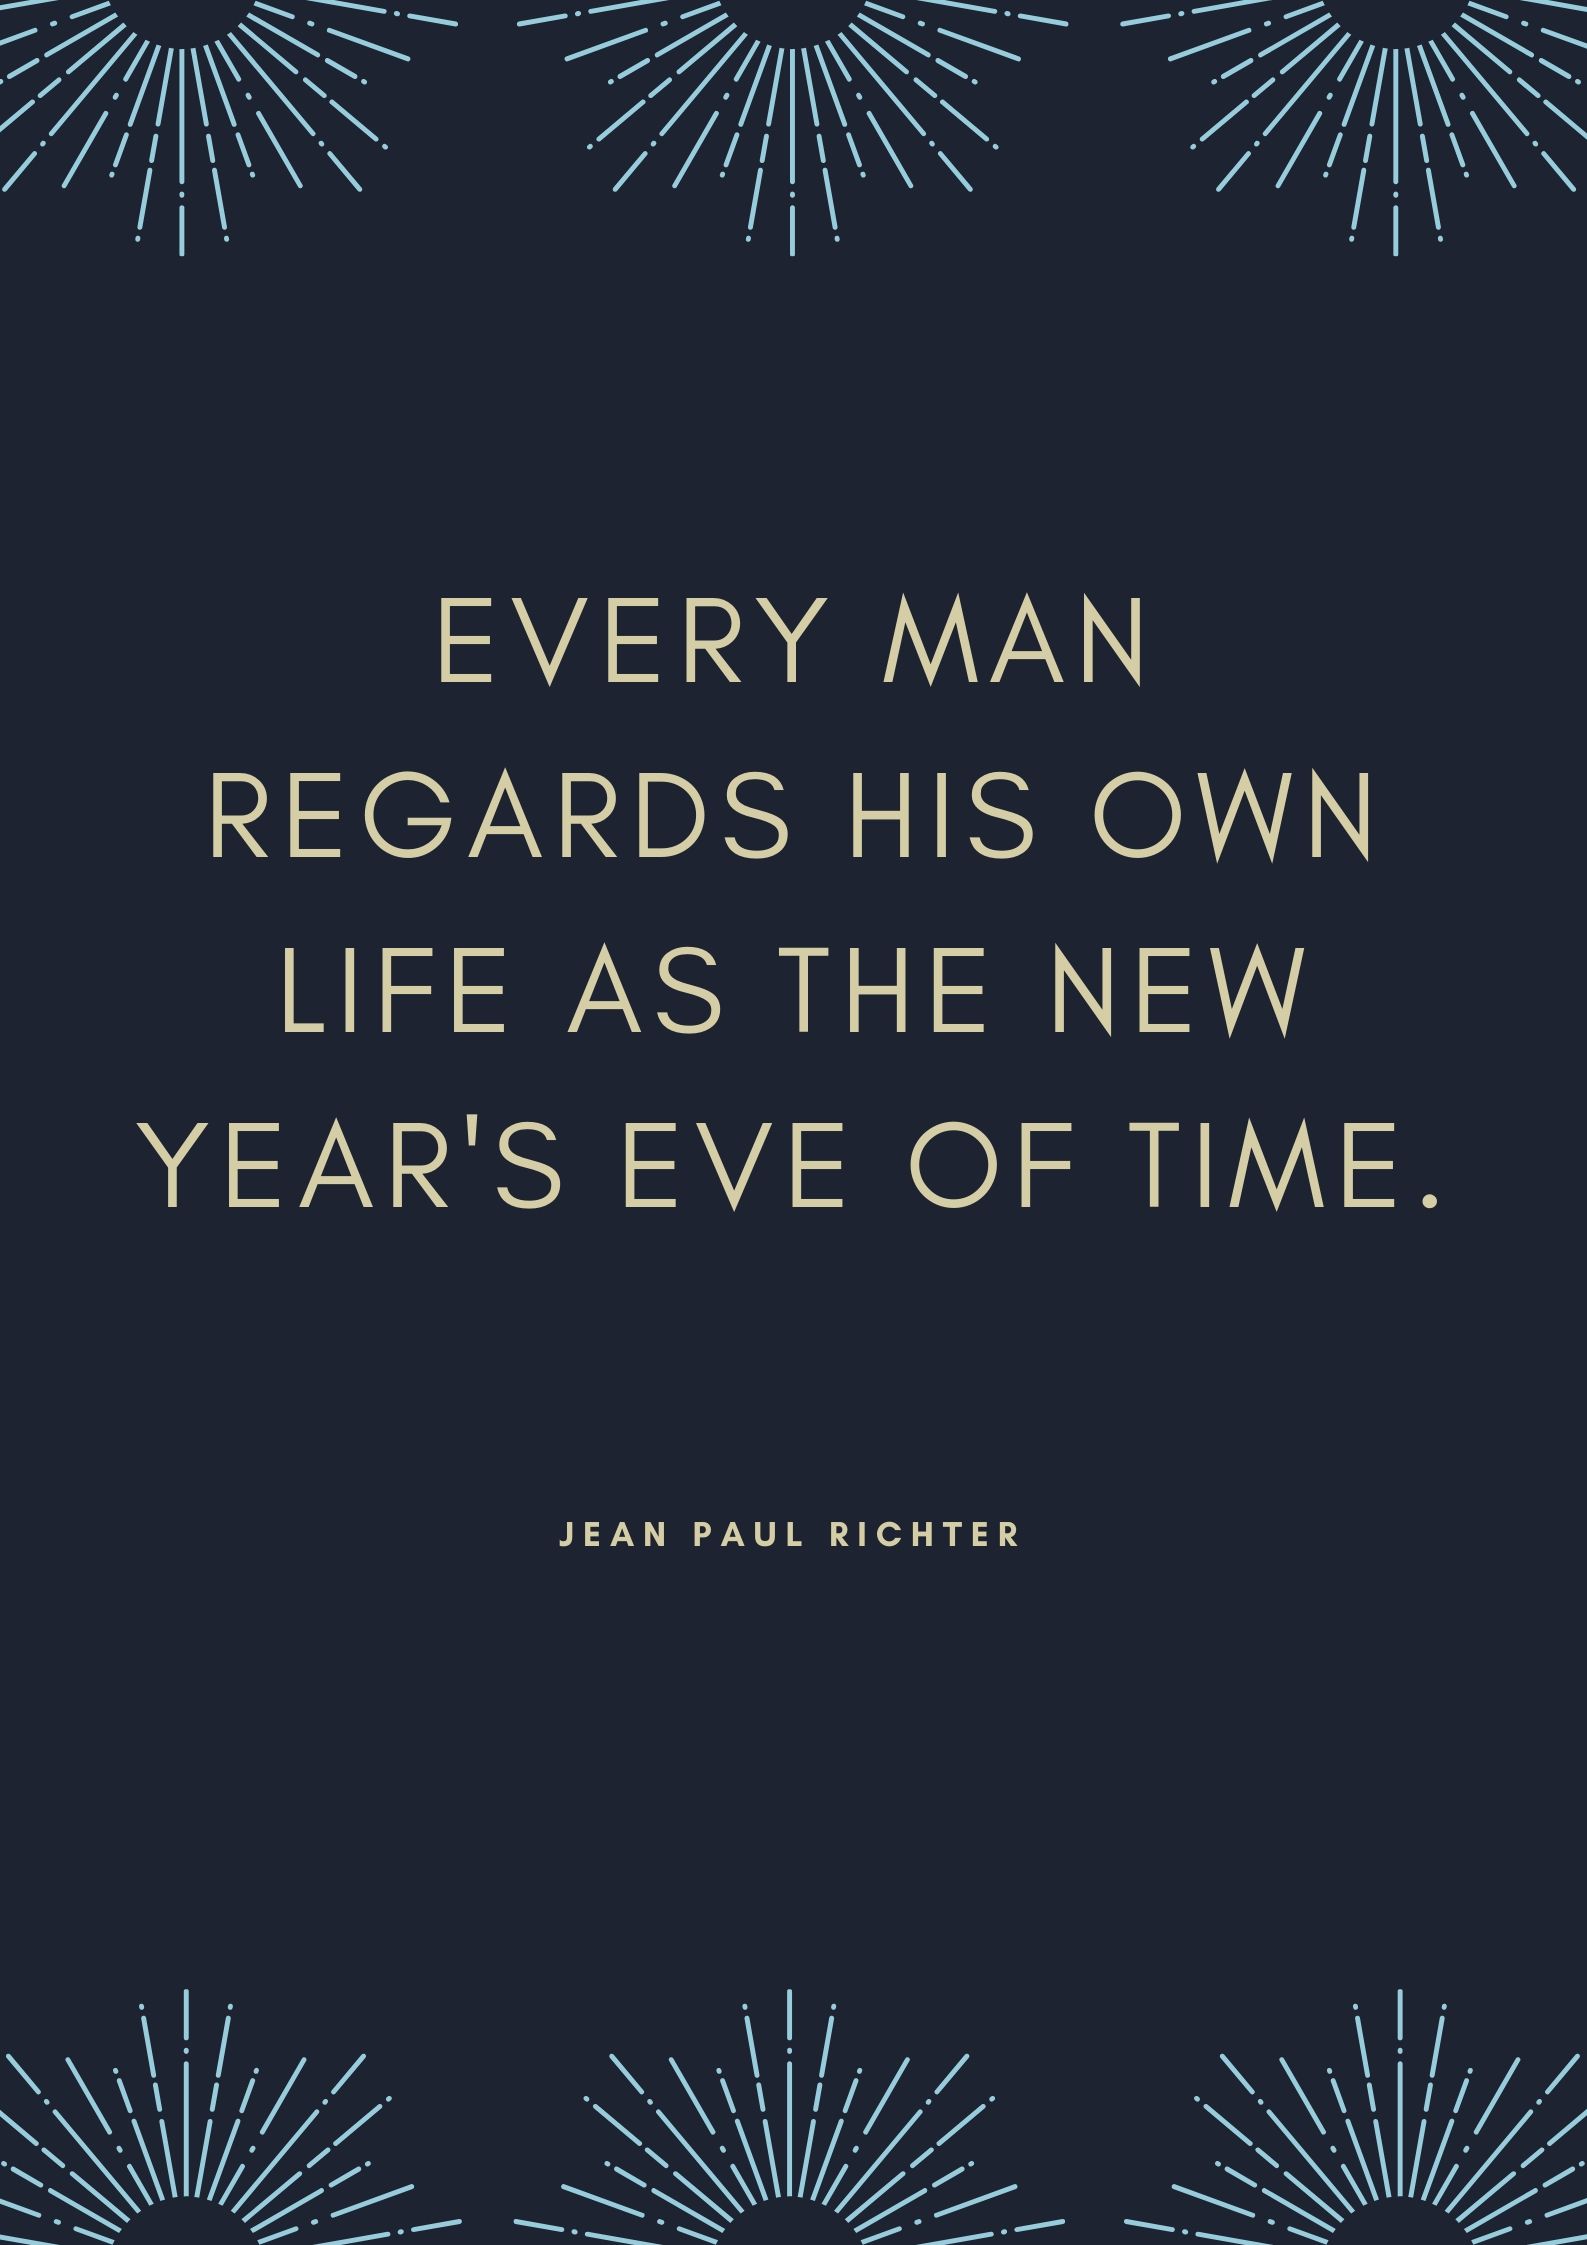 Every man regards his own life as the New Year's Eve of time.